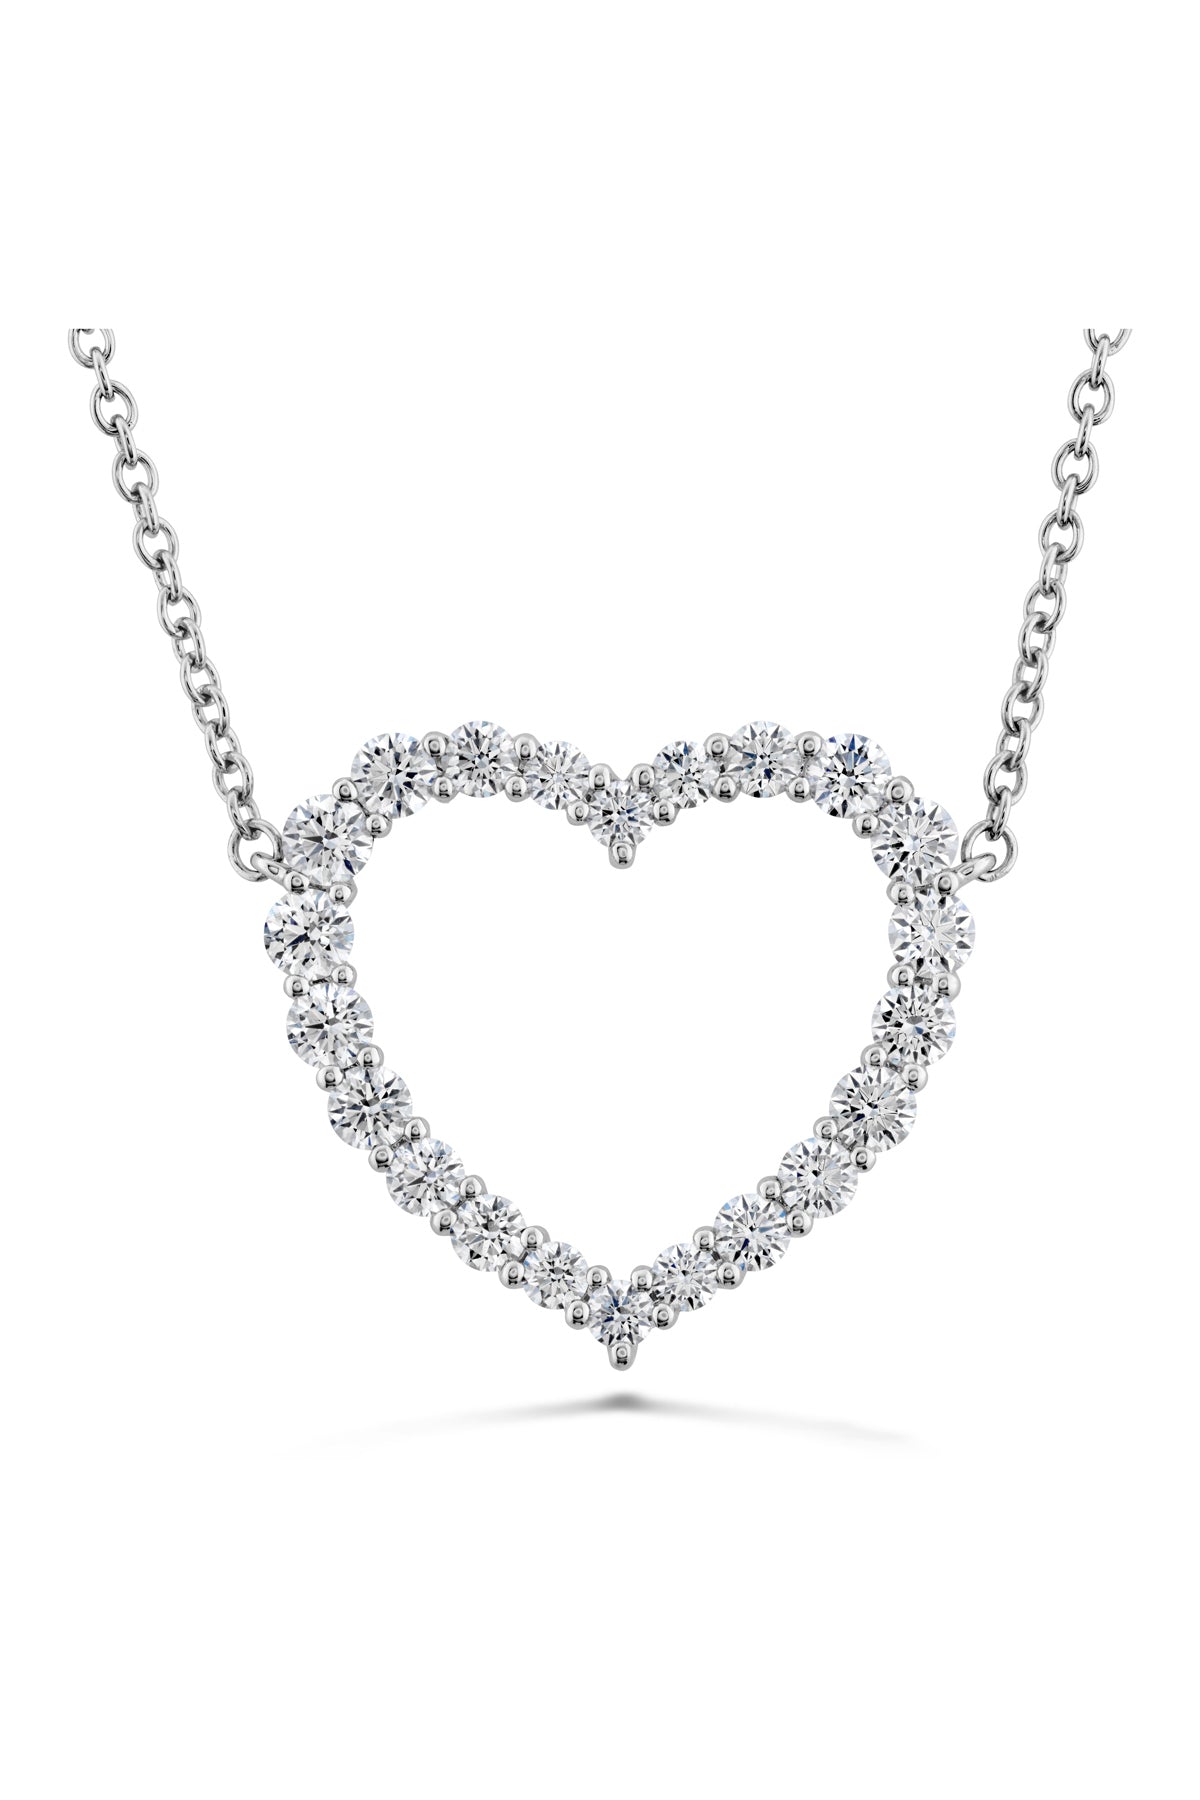 Signature Heart Pendant - Large From Hearts On Fire available at LeGassick Diamonds and Jewellery Gold Coast, Australia.